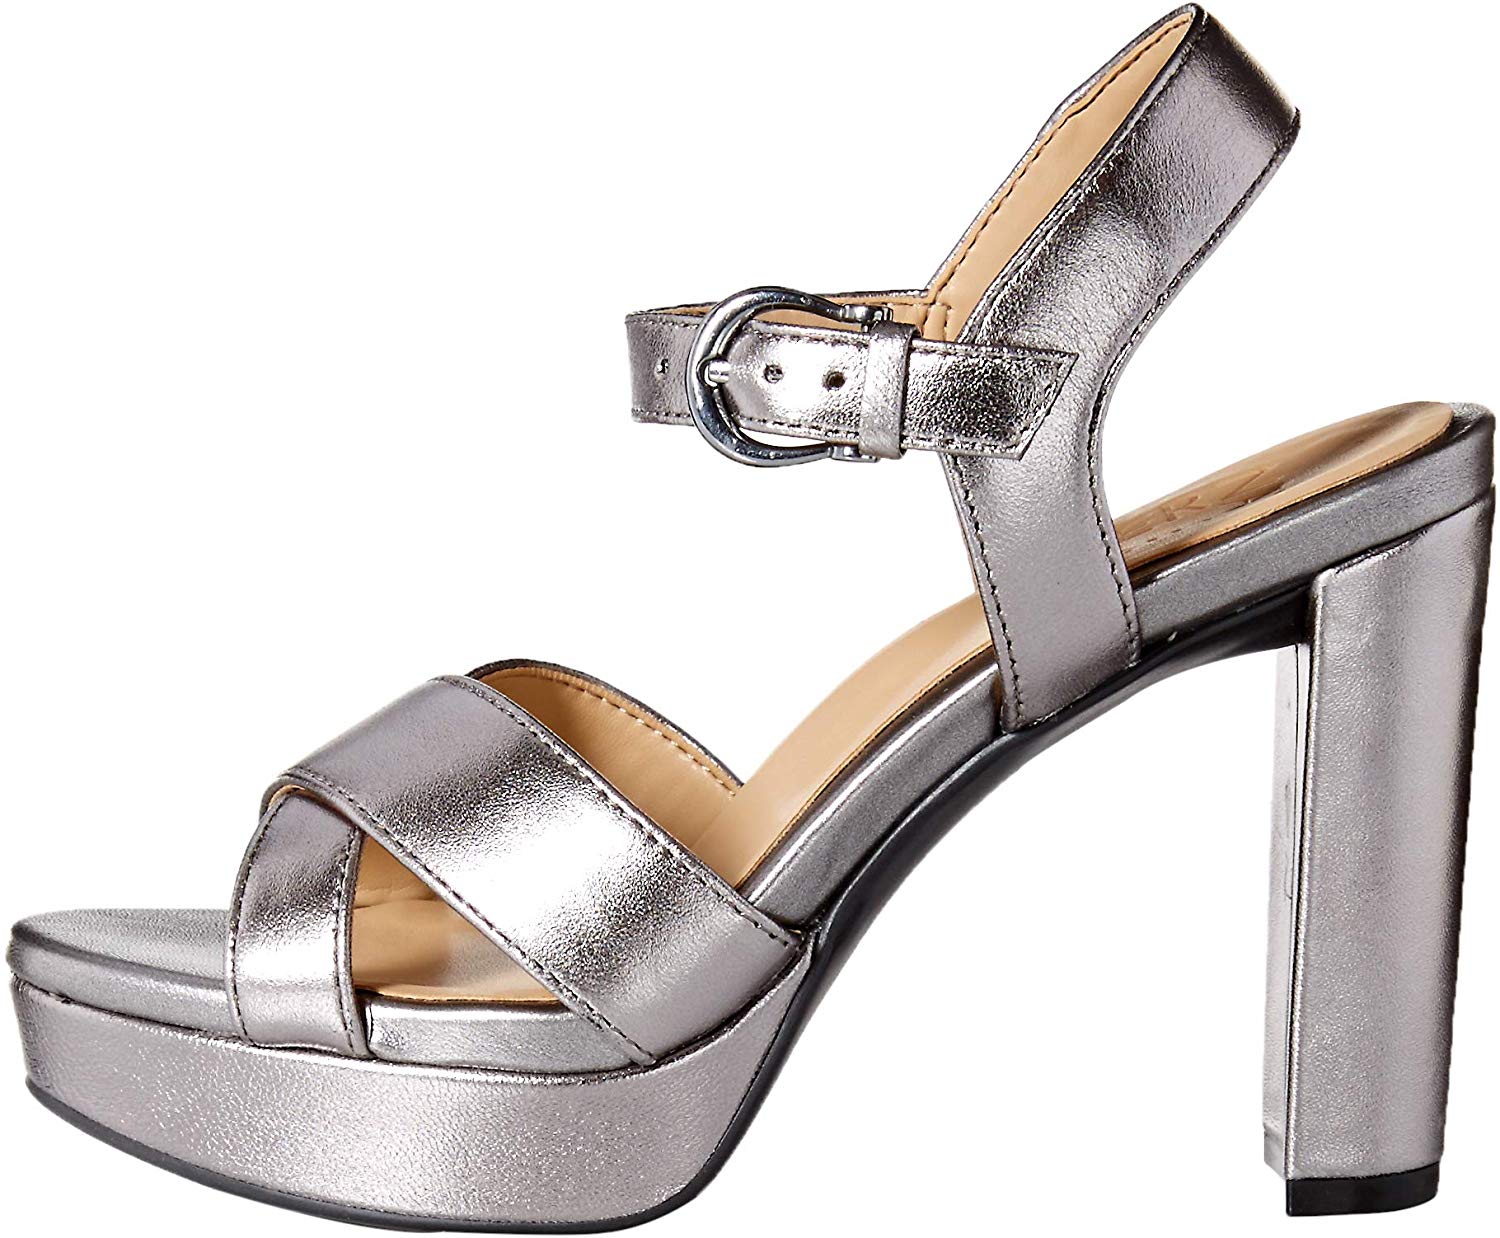 Naturalizer Womens Heeled Sandals in Silver Color, Size 10 SUF ...